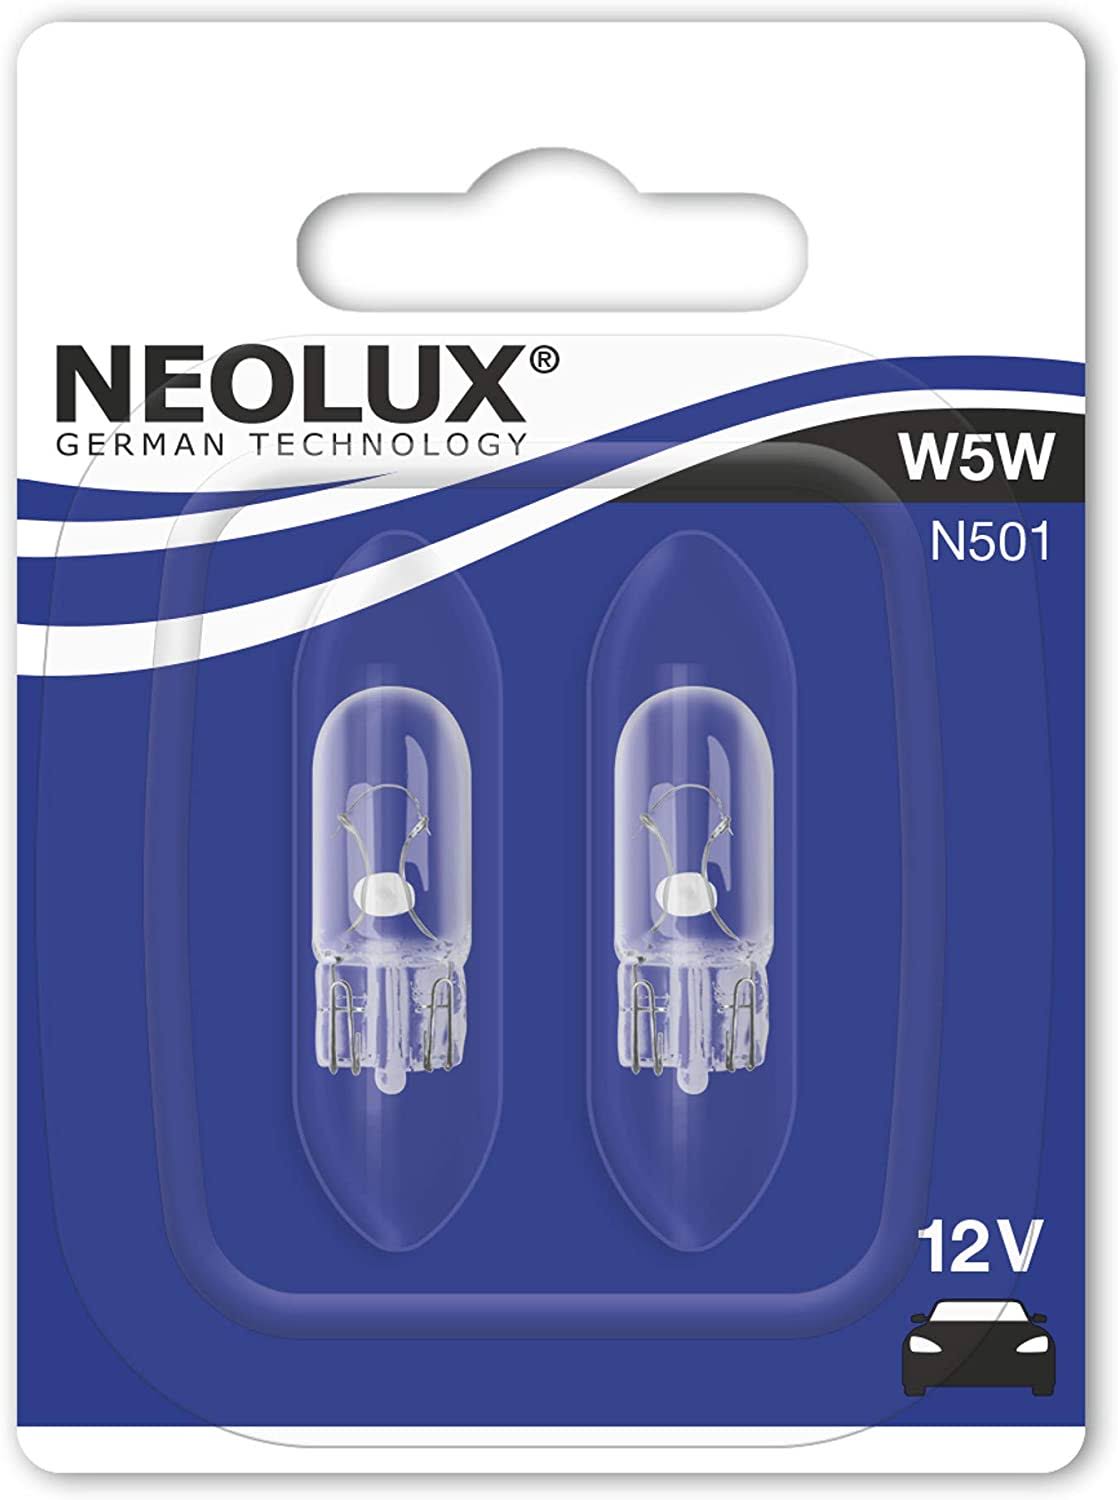 Neolux Standard Signal Lamp for Cars and Motorcycles